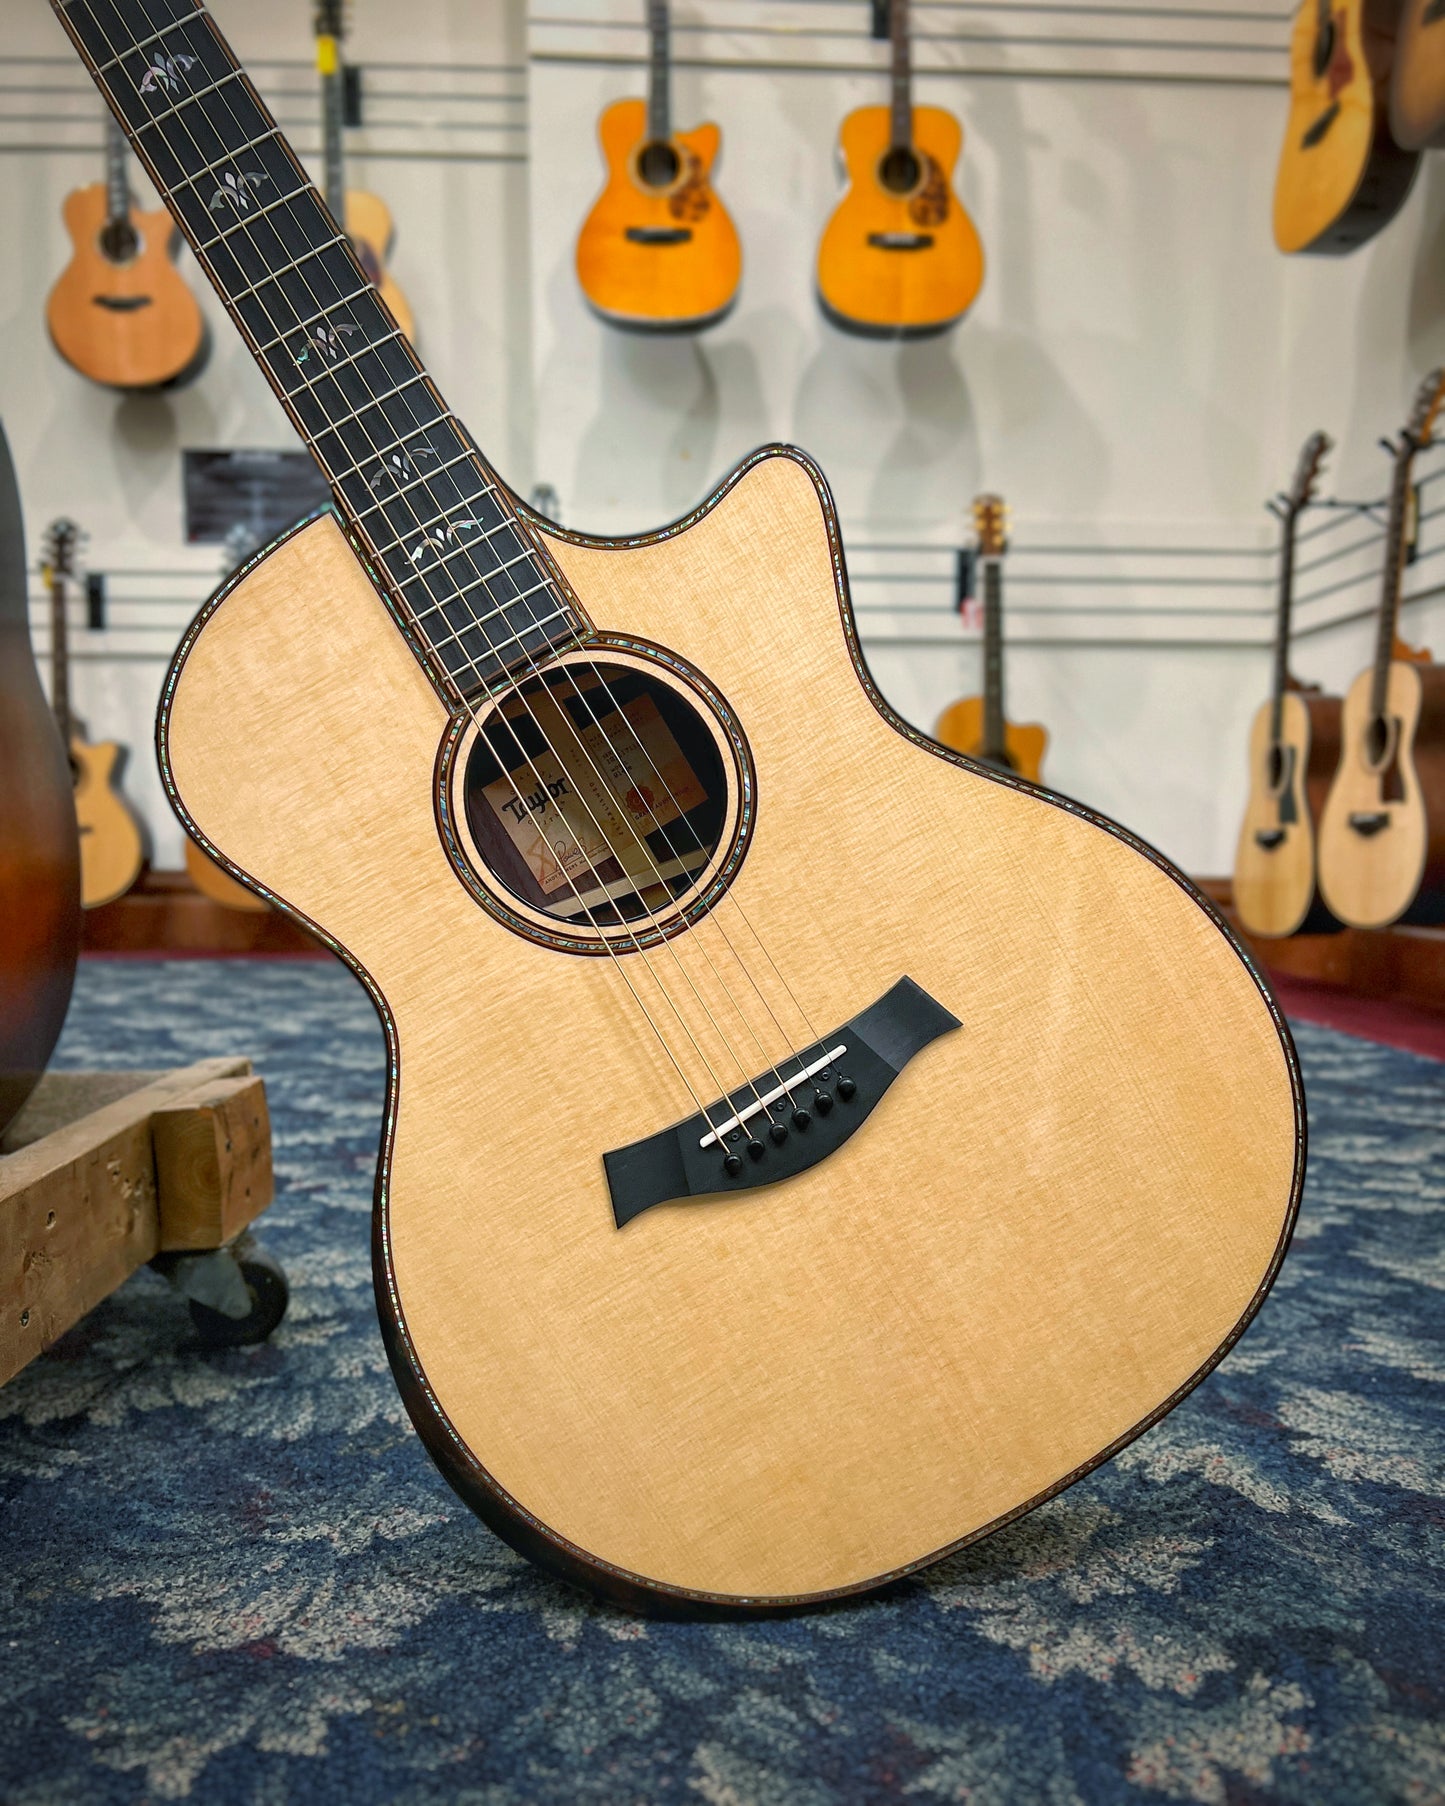 Showroom photo of Taylor 914ce Acoustic Guitar & Case